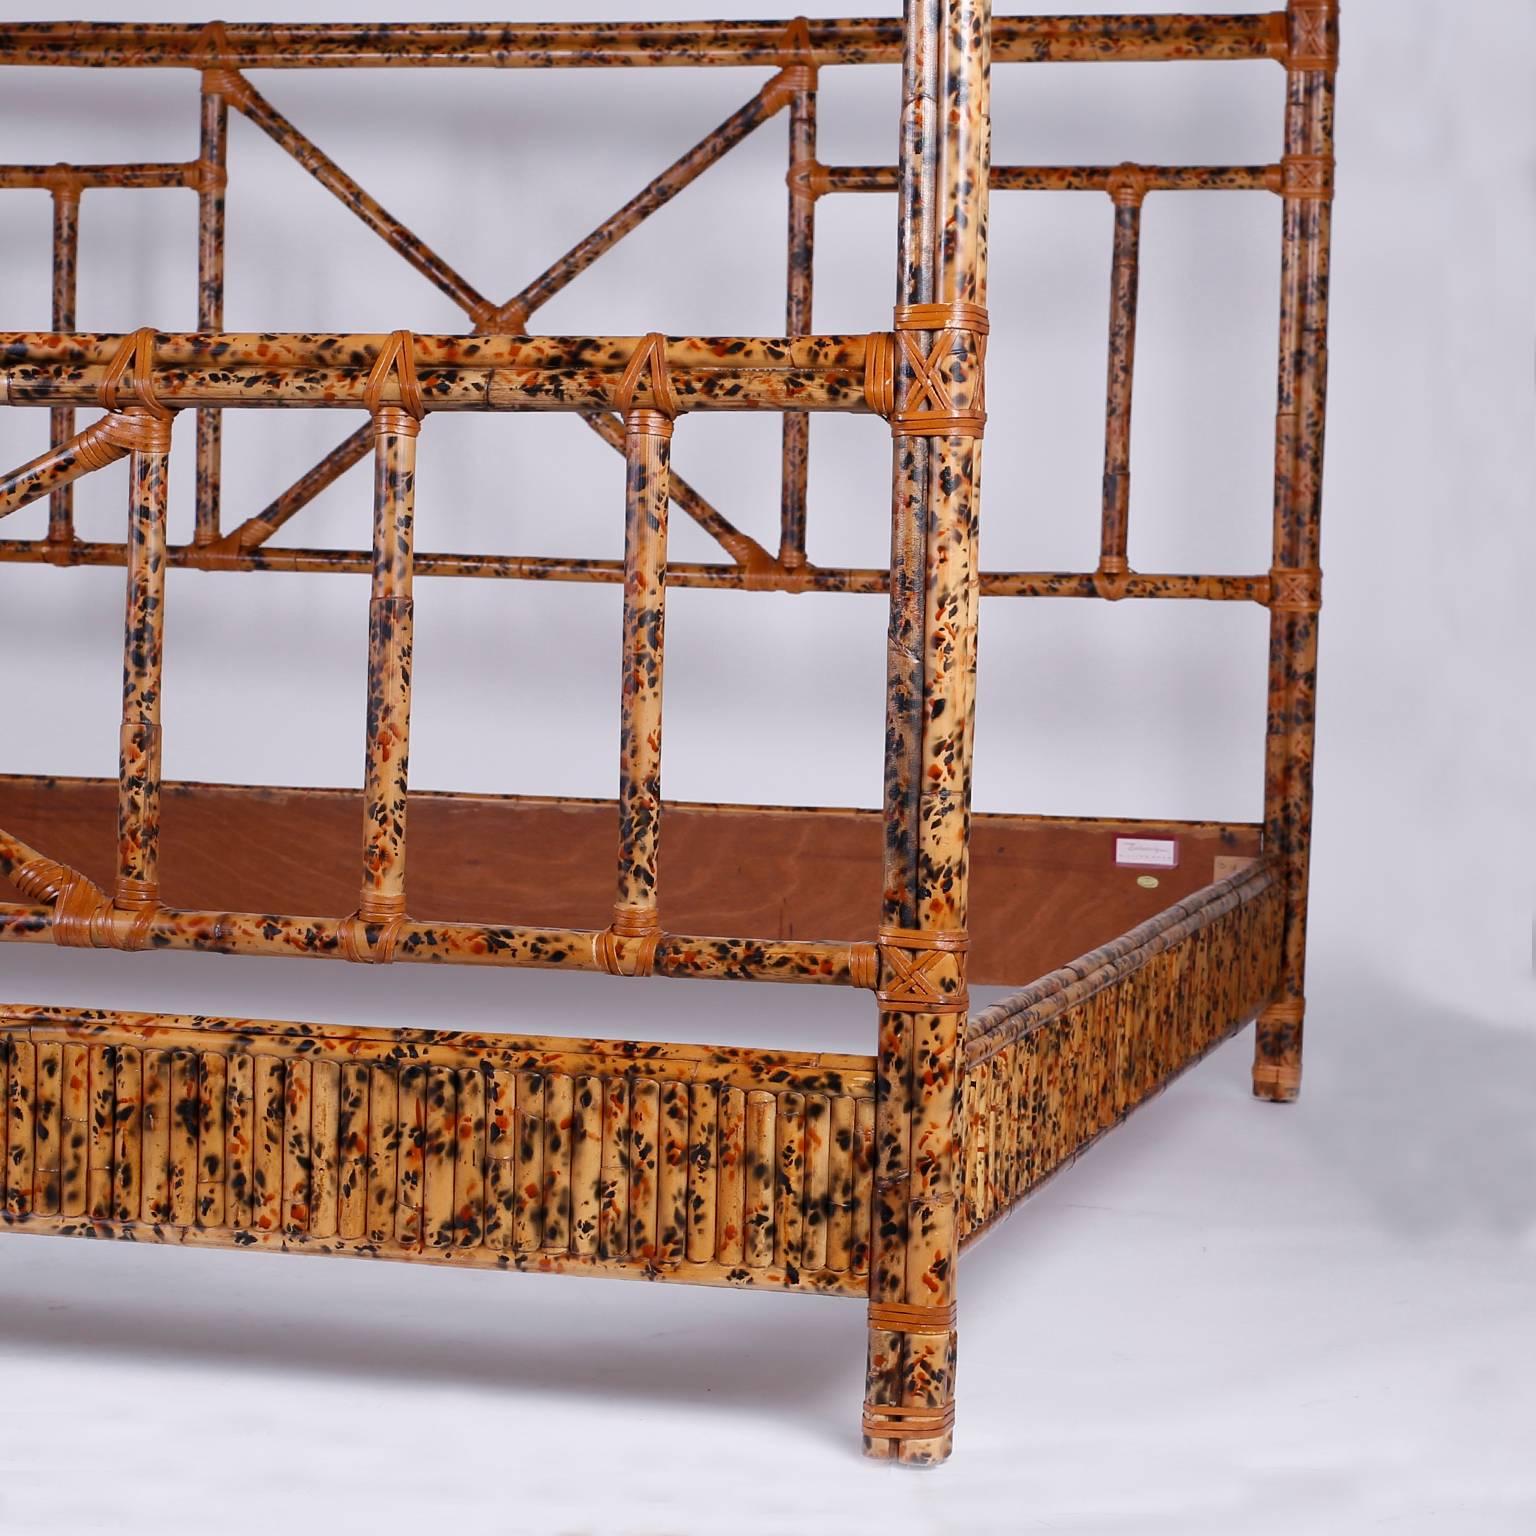 20th Century British Colonial Four-Poster King-Size Bed in Faux Bamboo